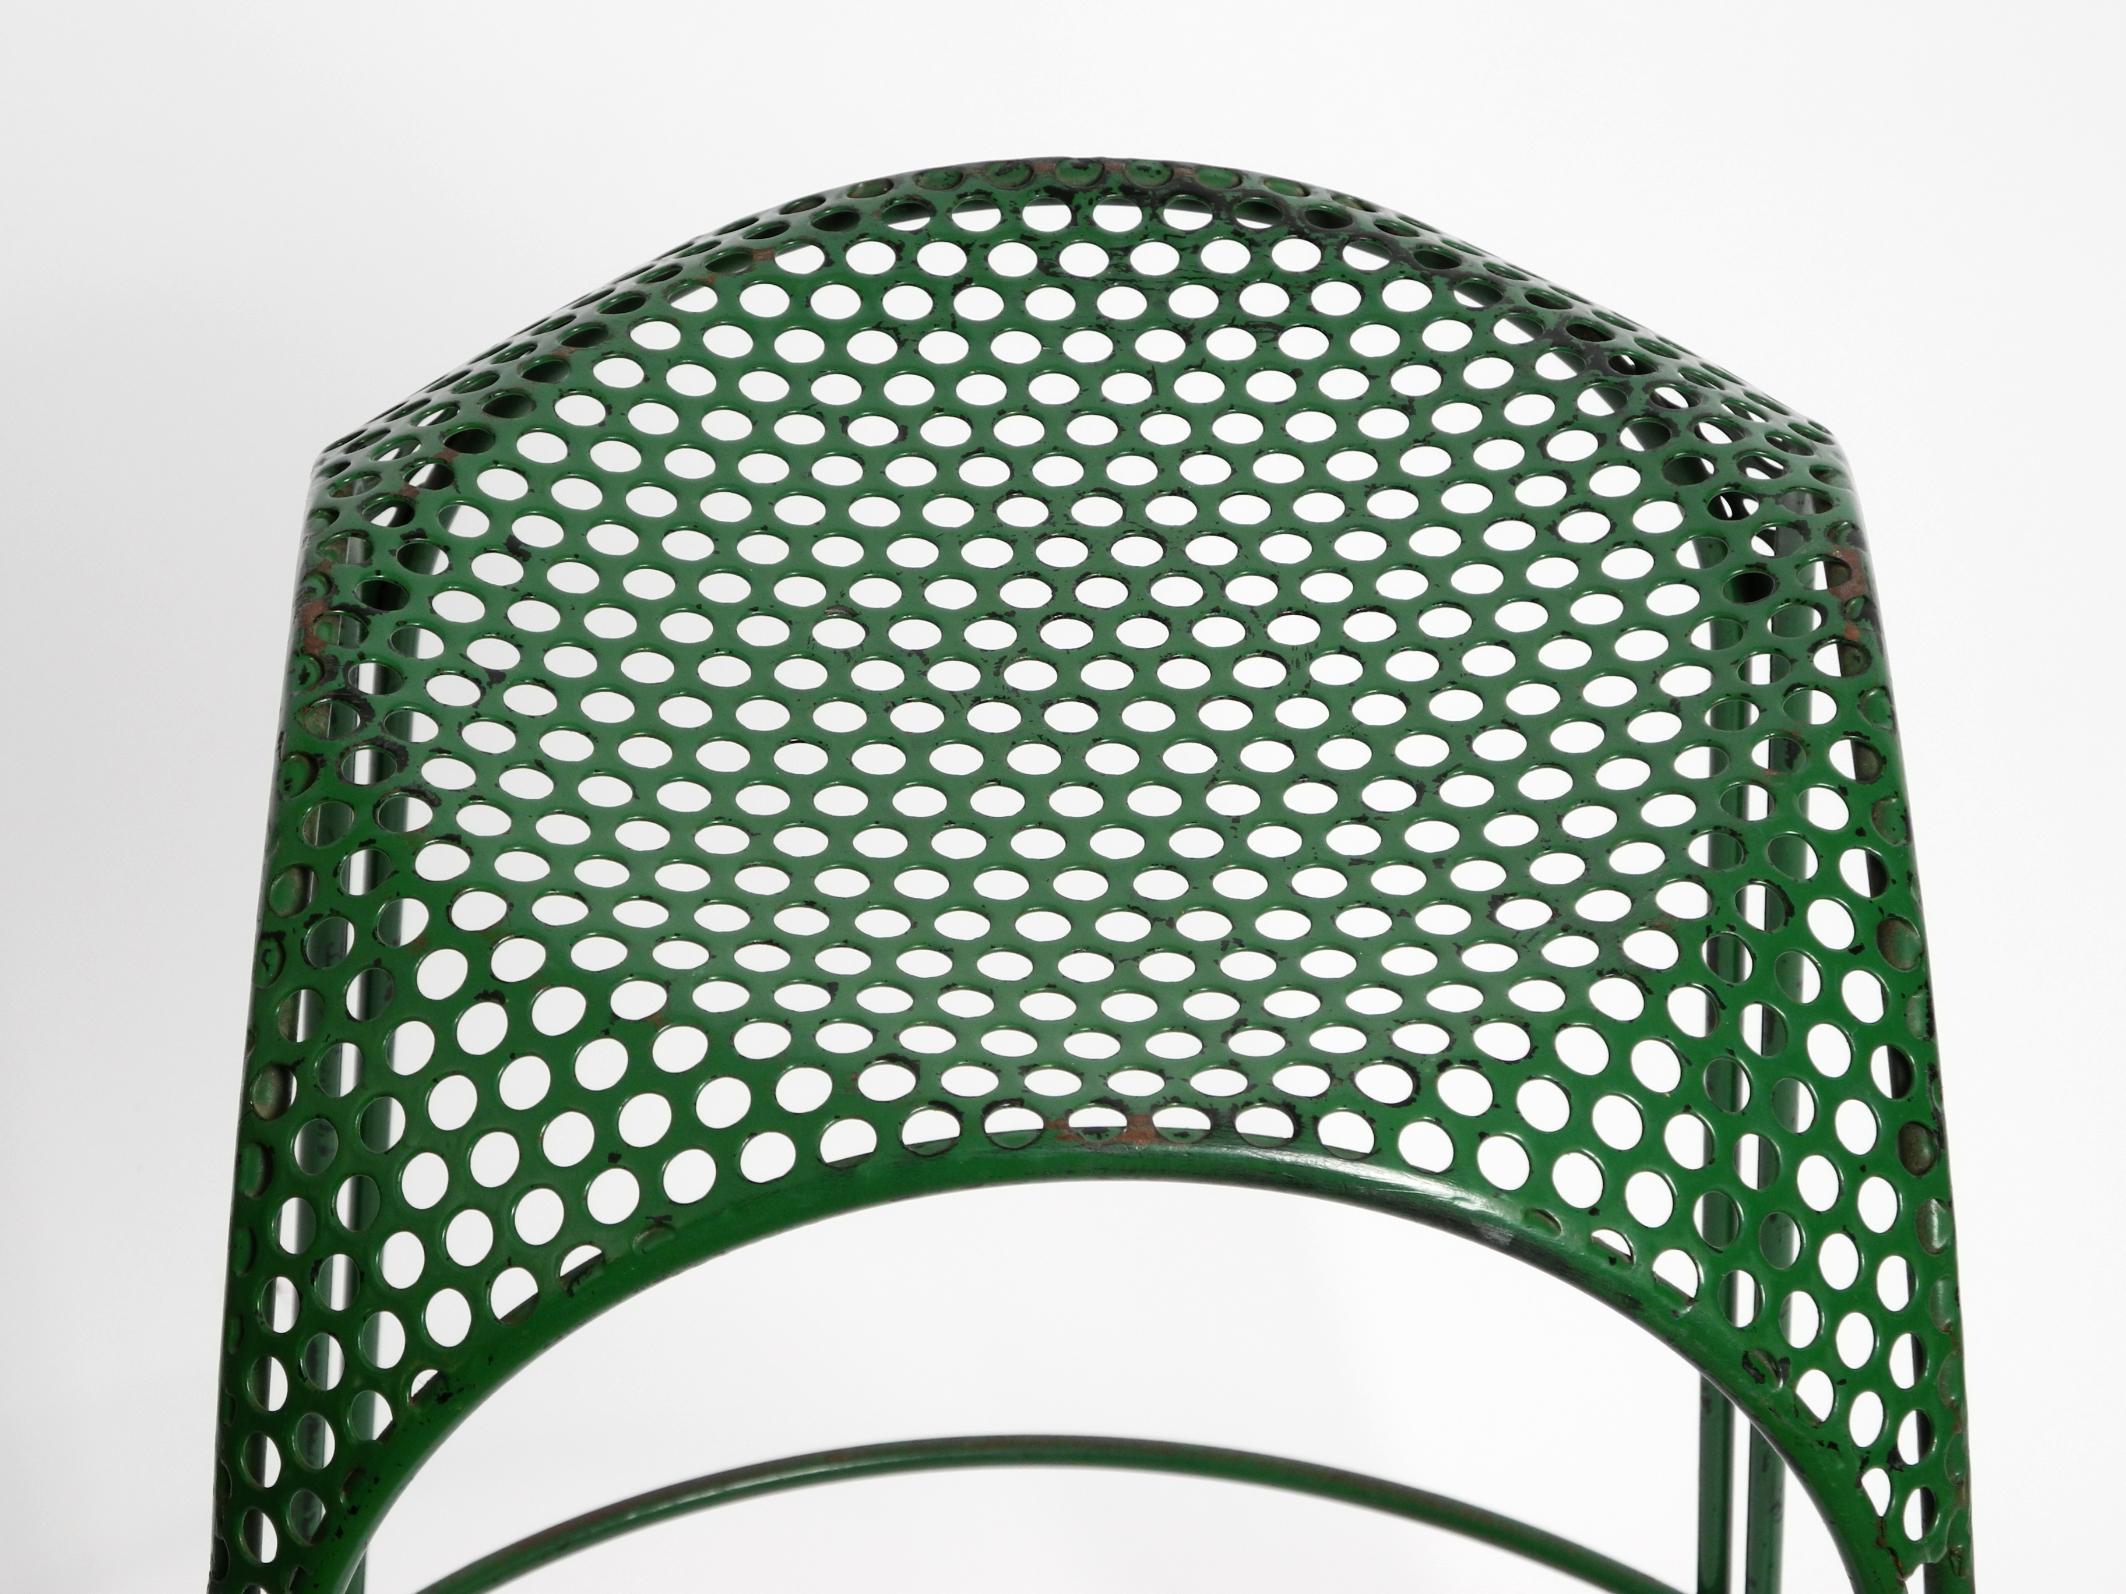 Metal Italian 1960s bar stool made of green painted metal with perforated metal seat For Sale